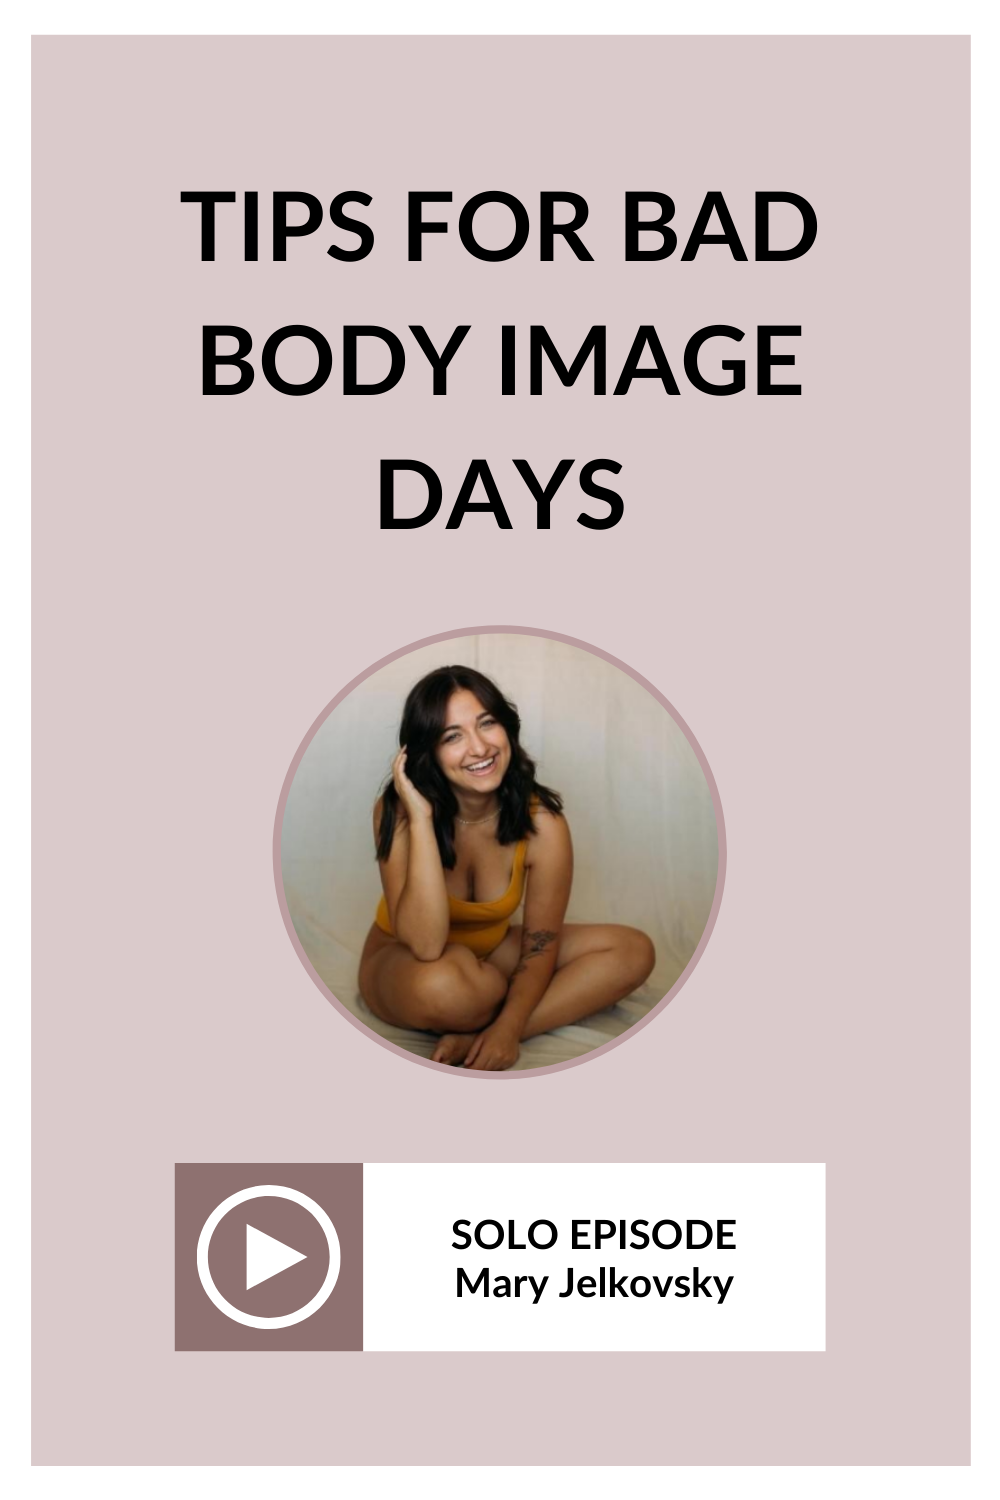 No matter how long you’ve been on this self-love journey, bad body-image days happen to all of us. In this episode, Mary shares her best tips for those negative body-image days, including tips on how to improve your body image.